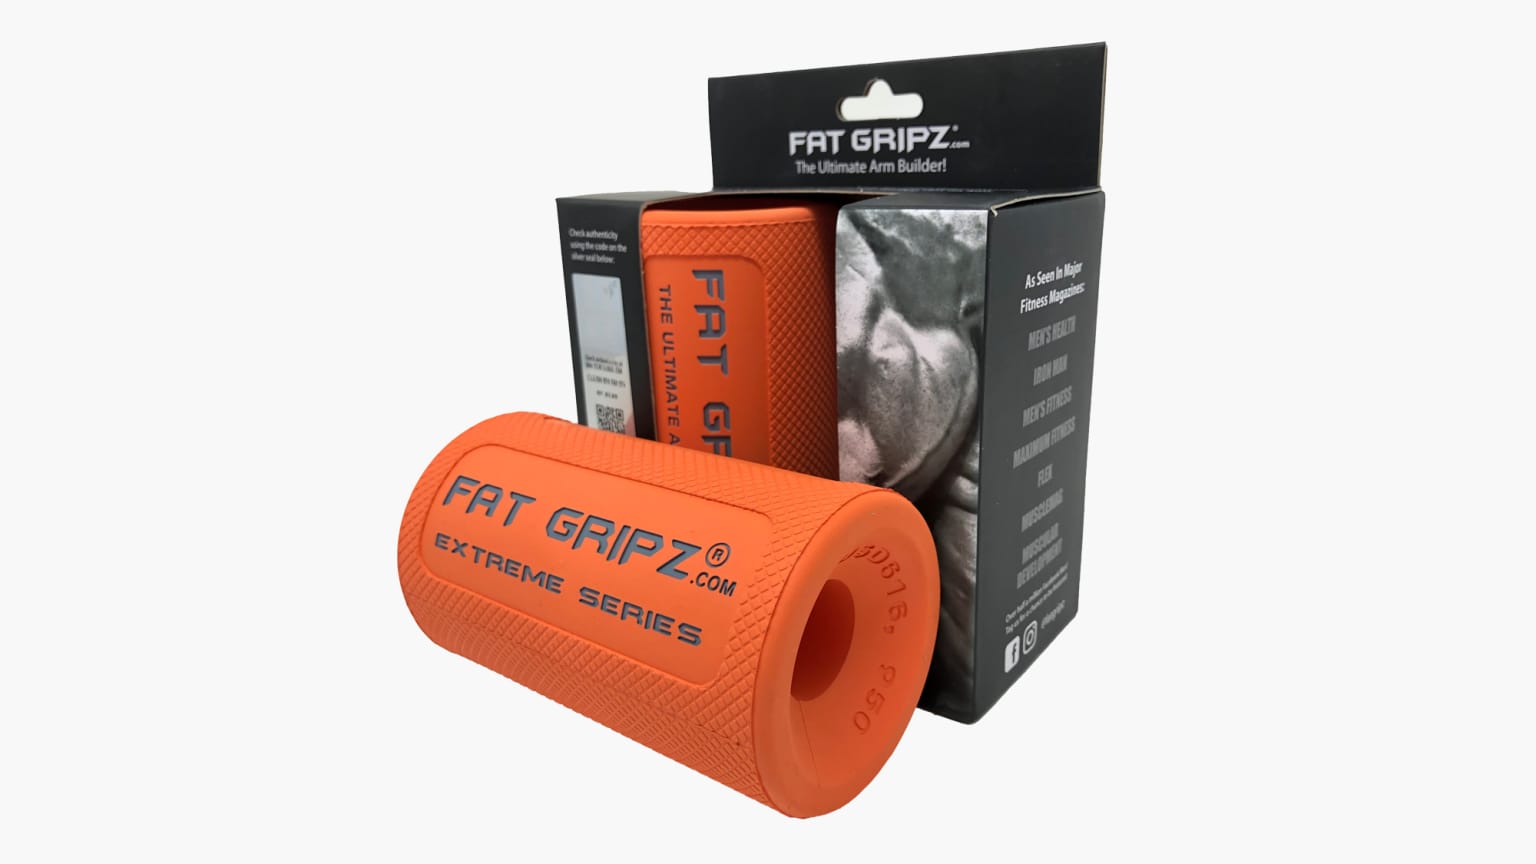 Buy fat gripz they said. It'll be fun they said. Firearms are on fire.  Guess that means they're working. 10/10 : r/homegym